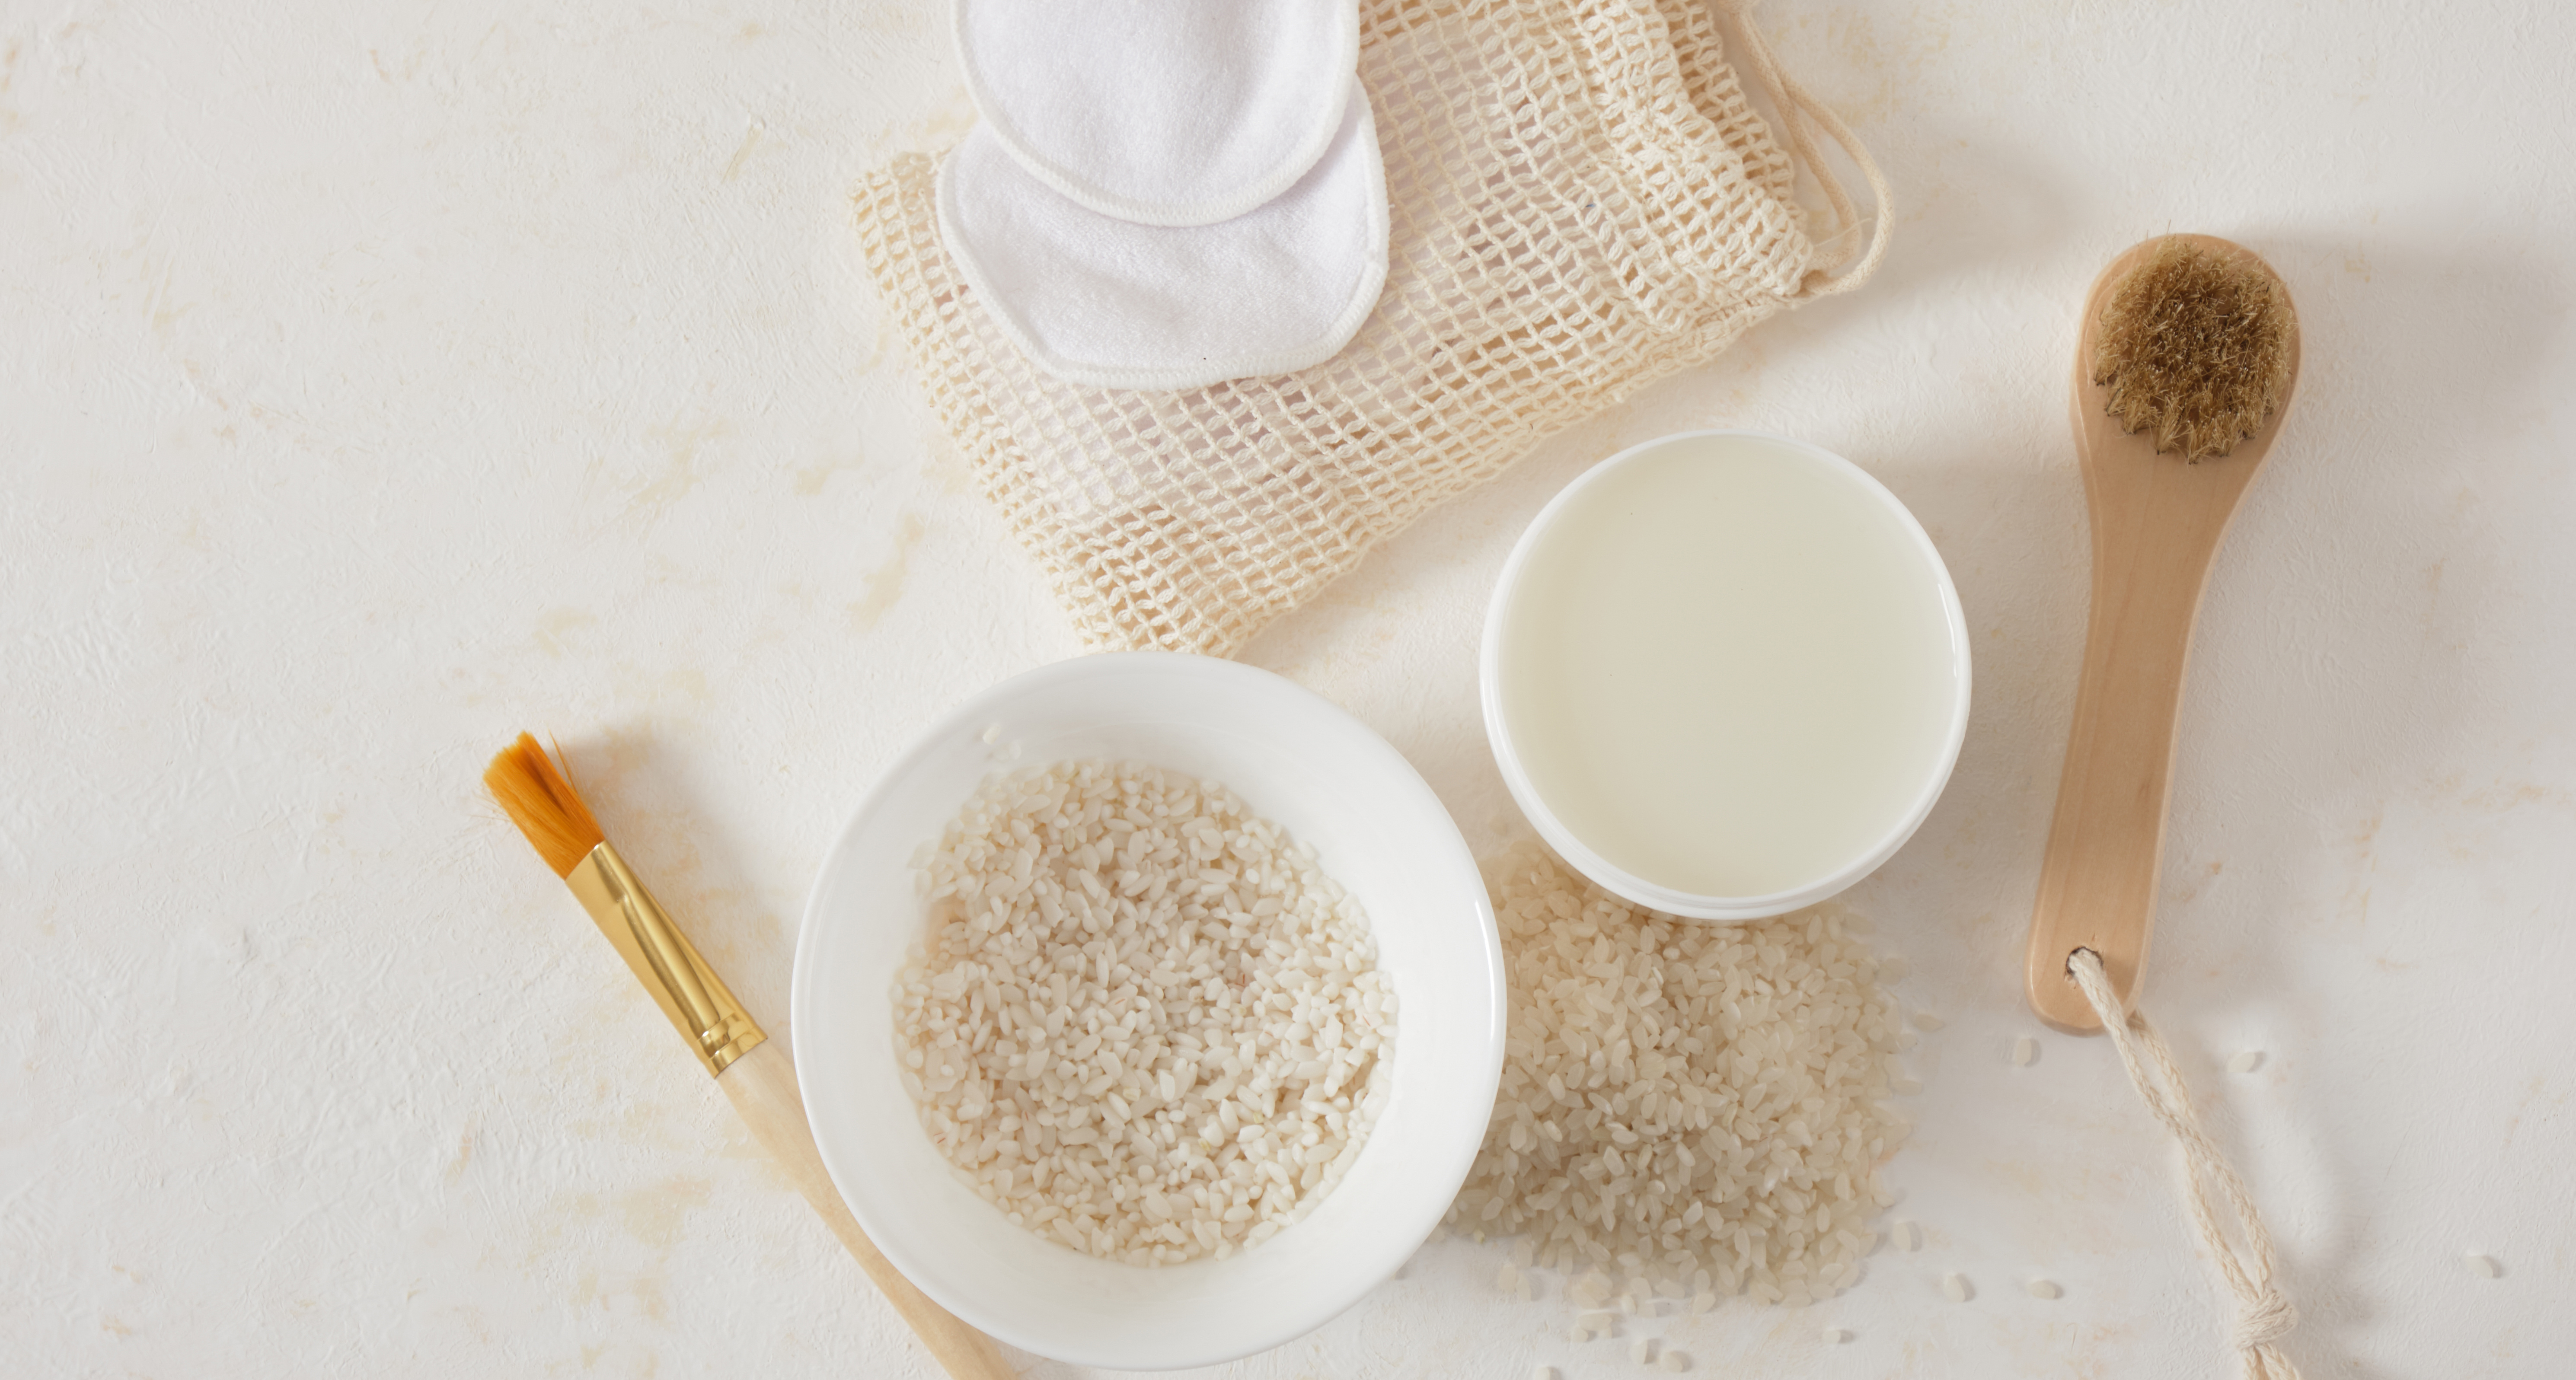 THE BENEFITS OF RICE IN NATURAL COSMETICS